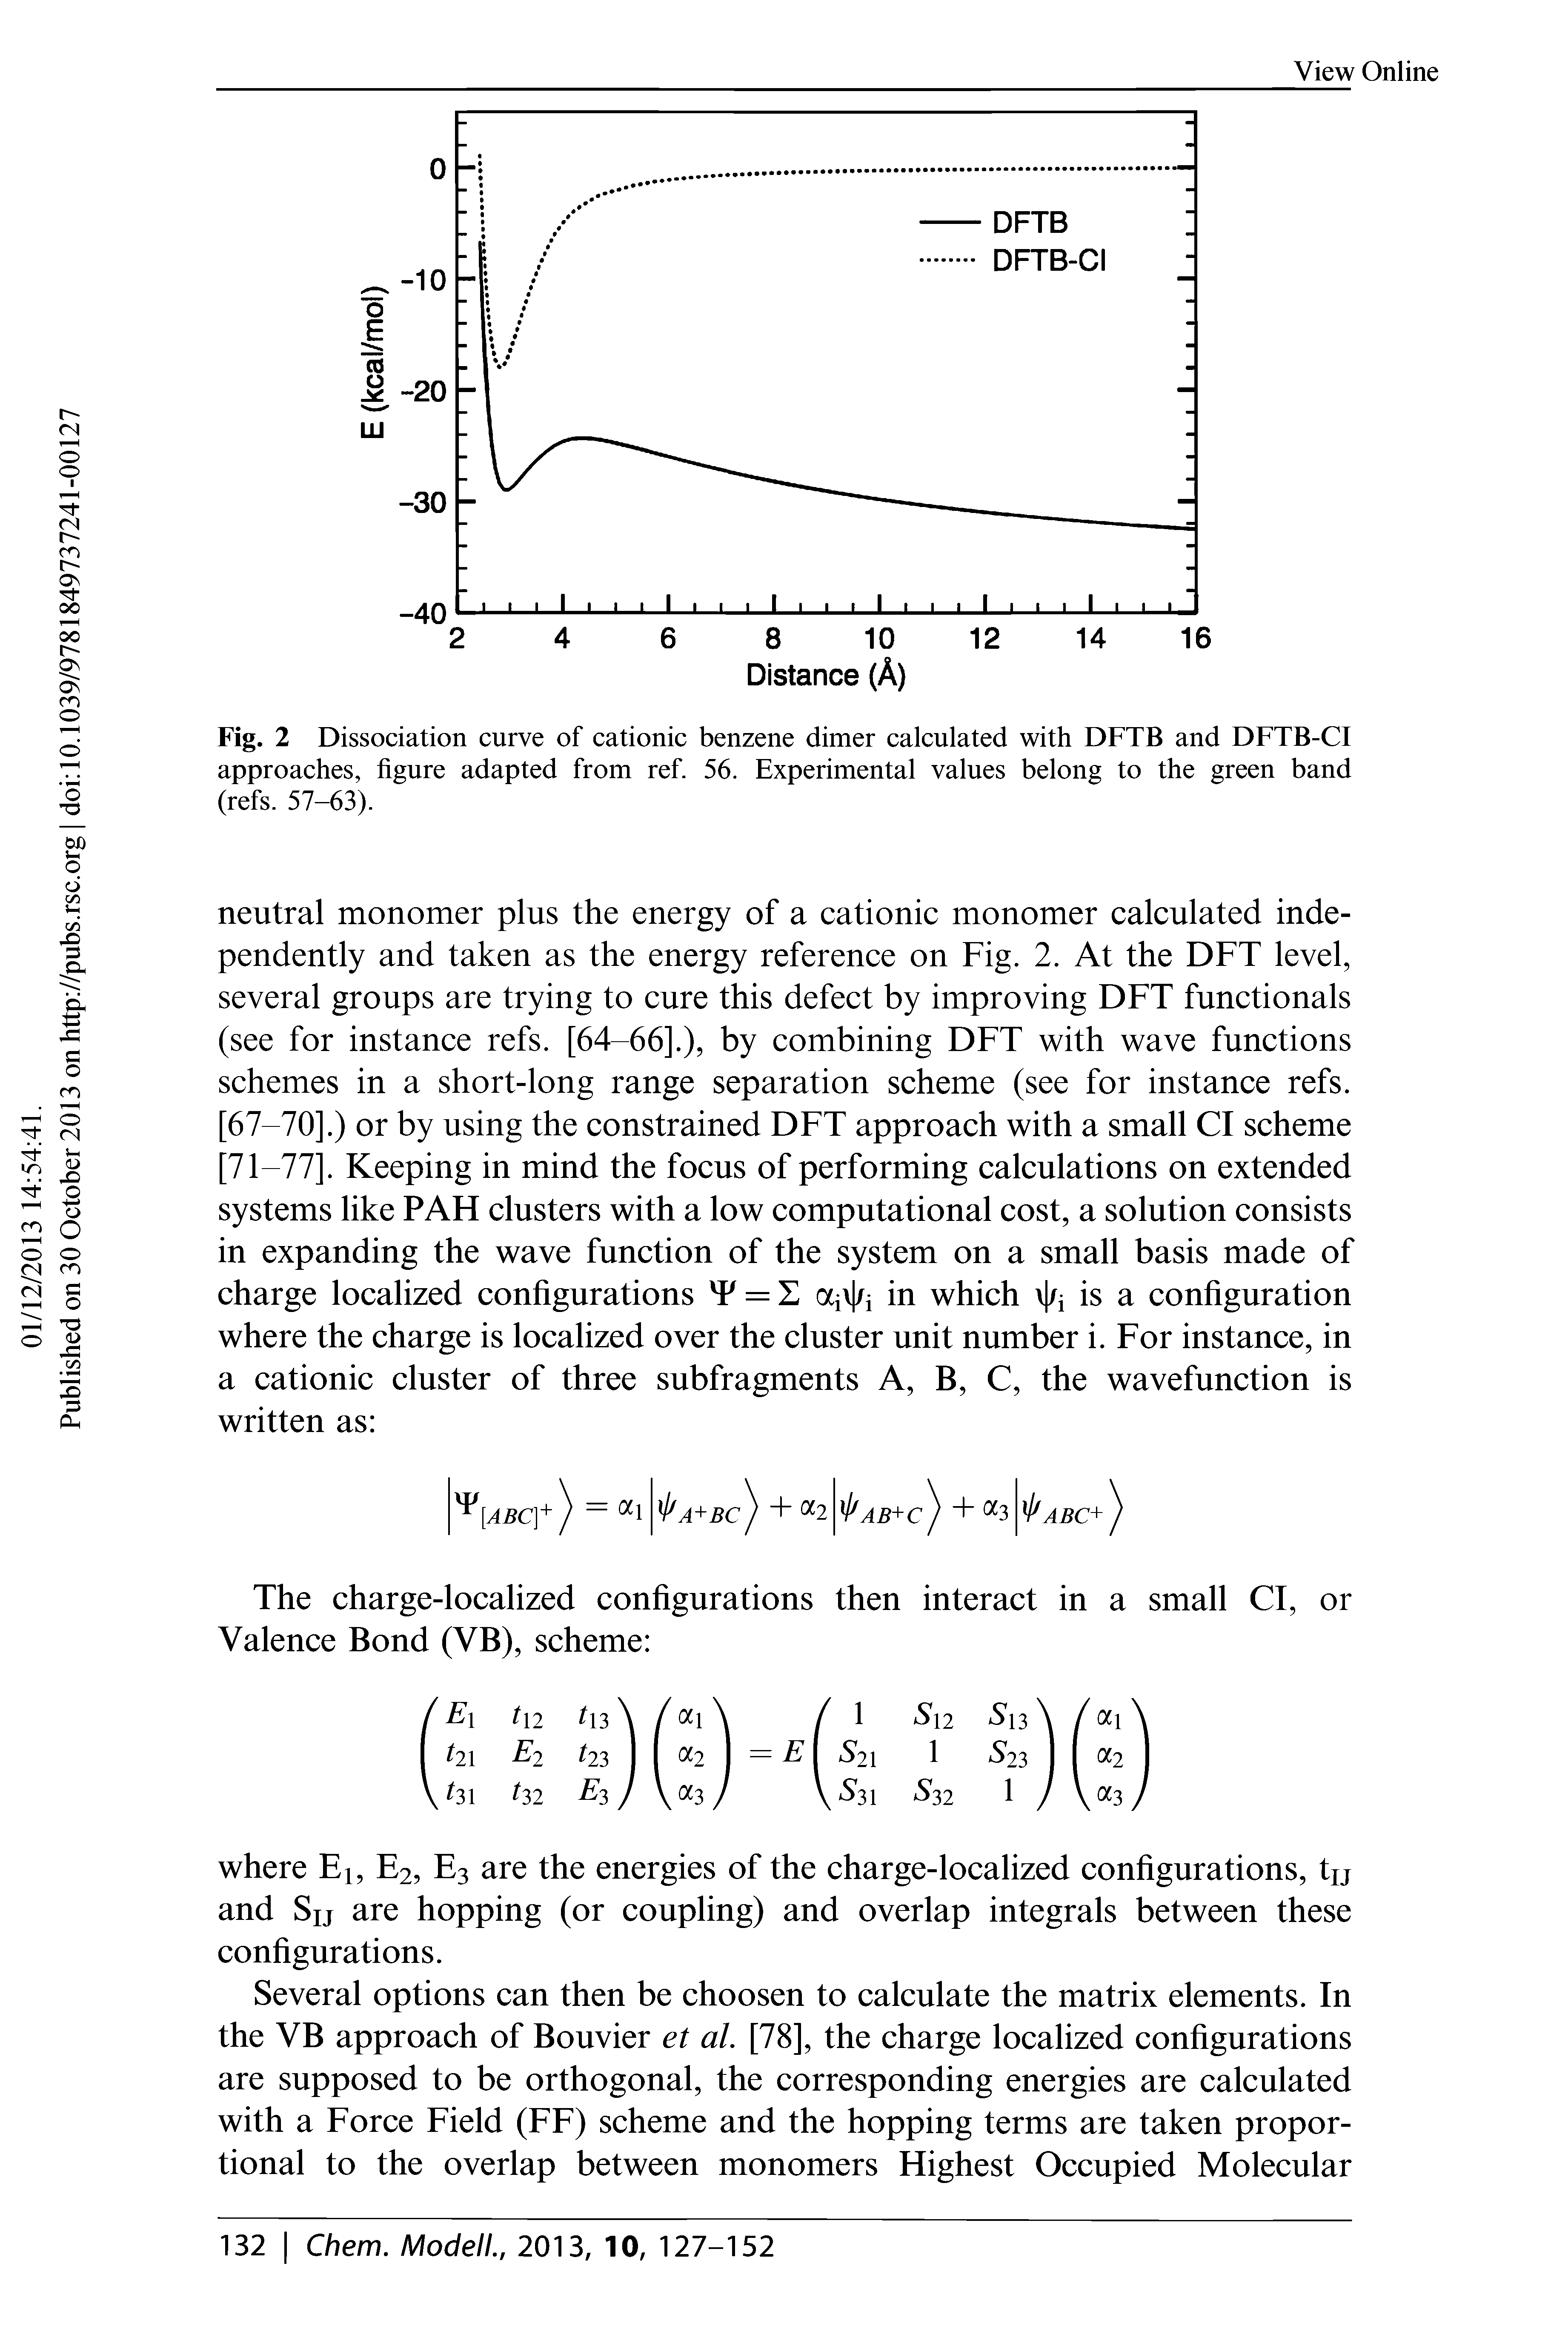 Fig. 2 Dissociation curve of cationic benzene dimer calculated with DFTB and DFTB-CI approaches, figure adapted from ref. 56. Experimental values belong to the green band (refs. 57-63).